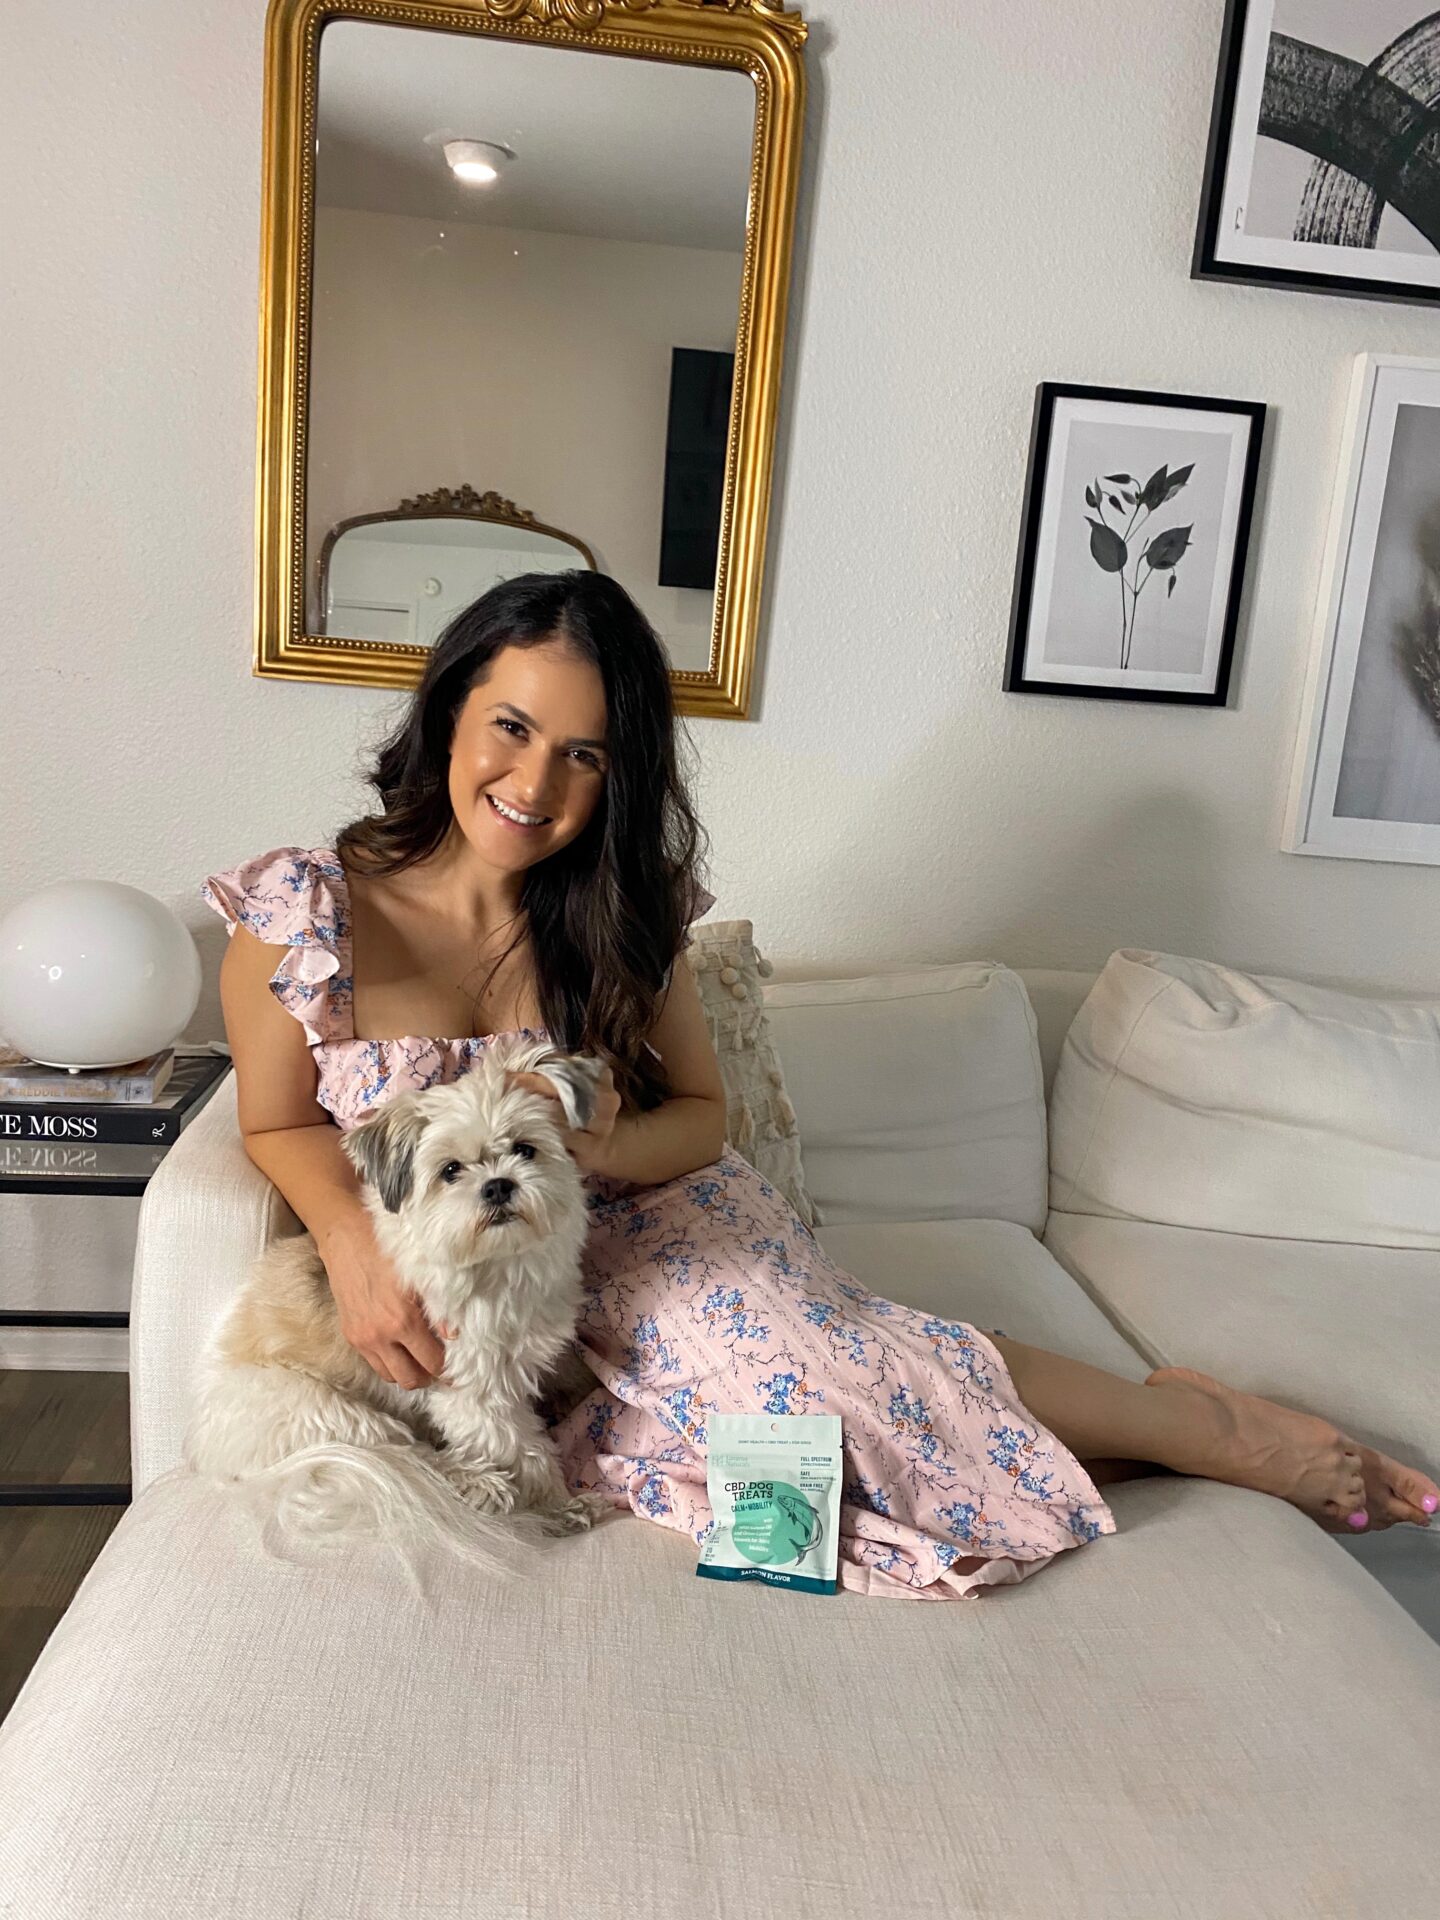 Why We Use Pet CBD in Our Household